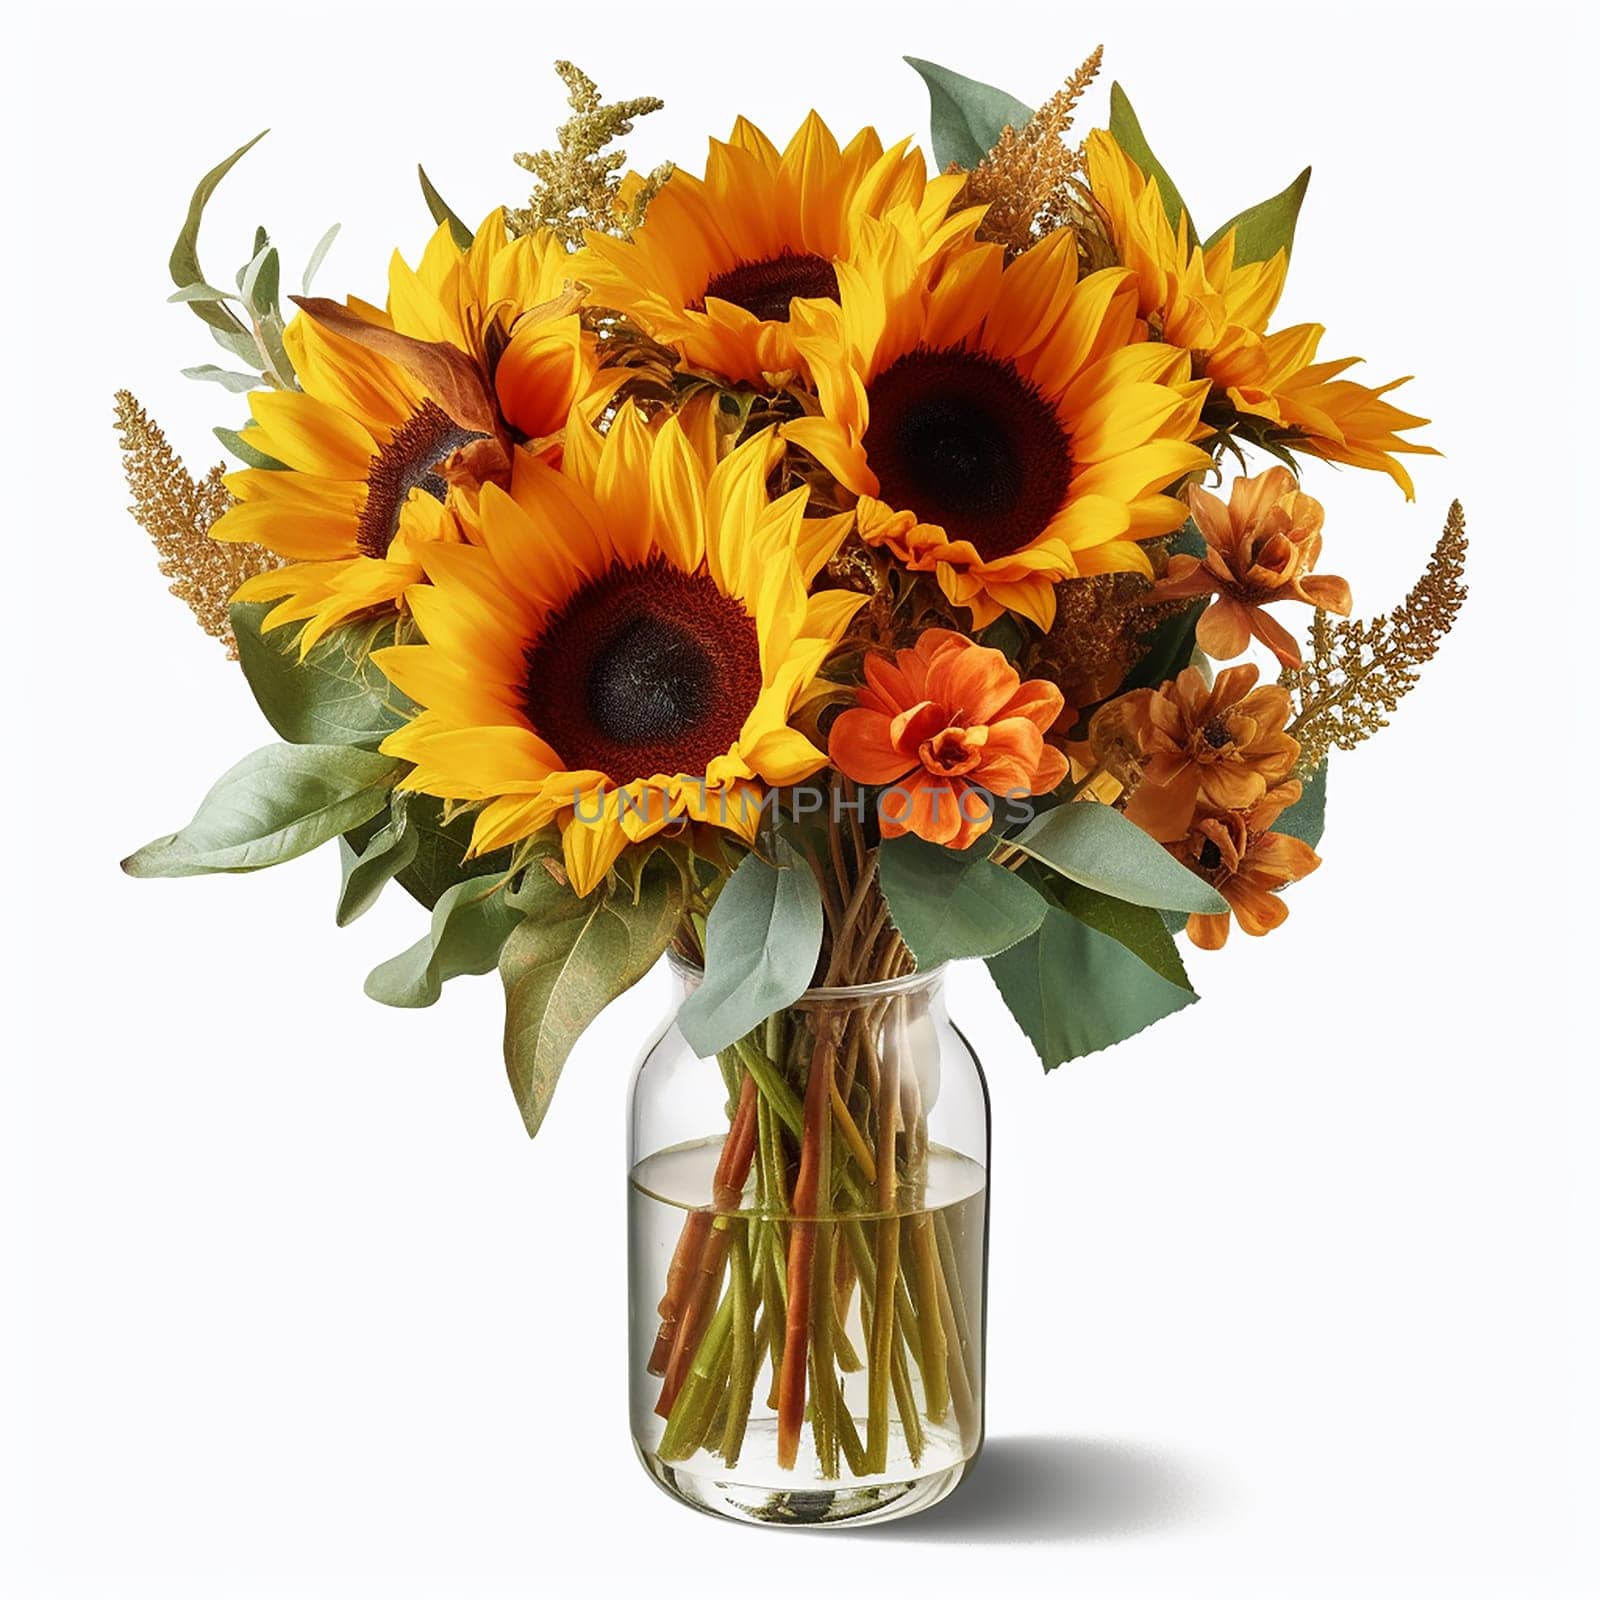 Bright sunflowers with orange blooms in a glass vase by Hype2art